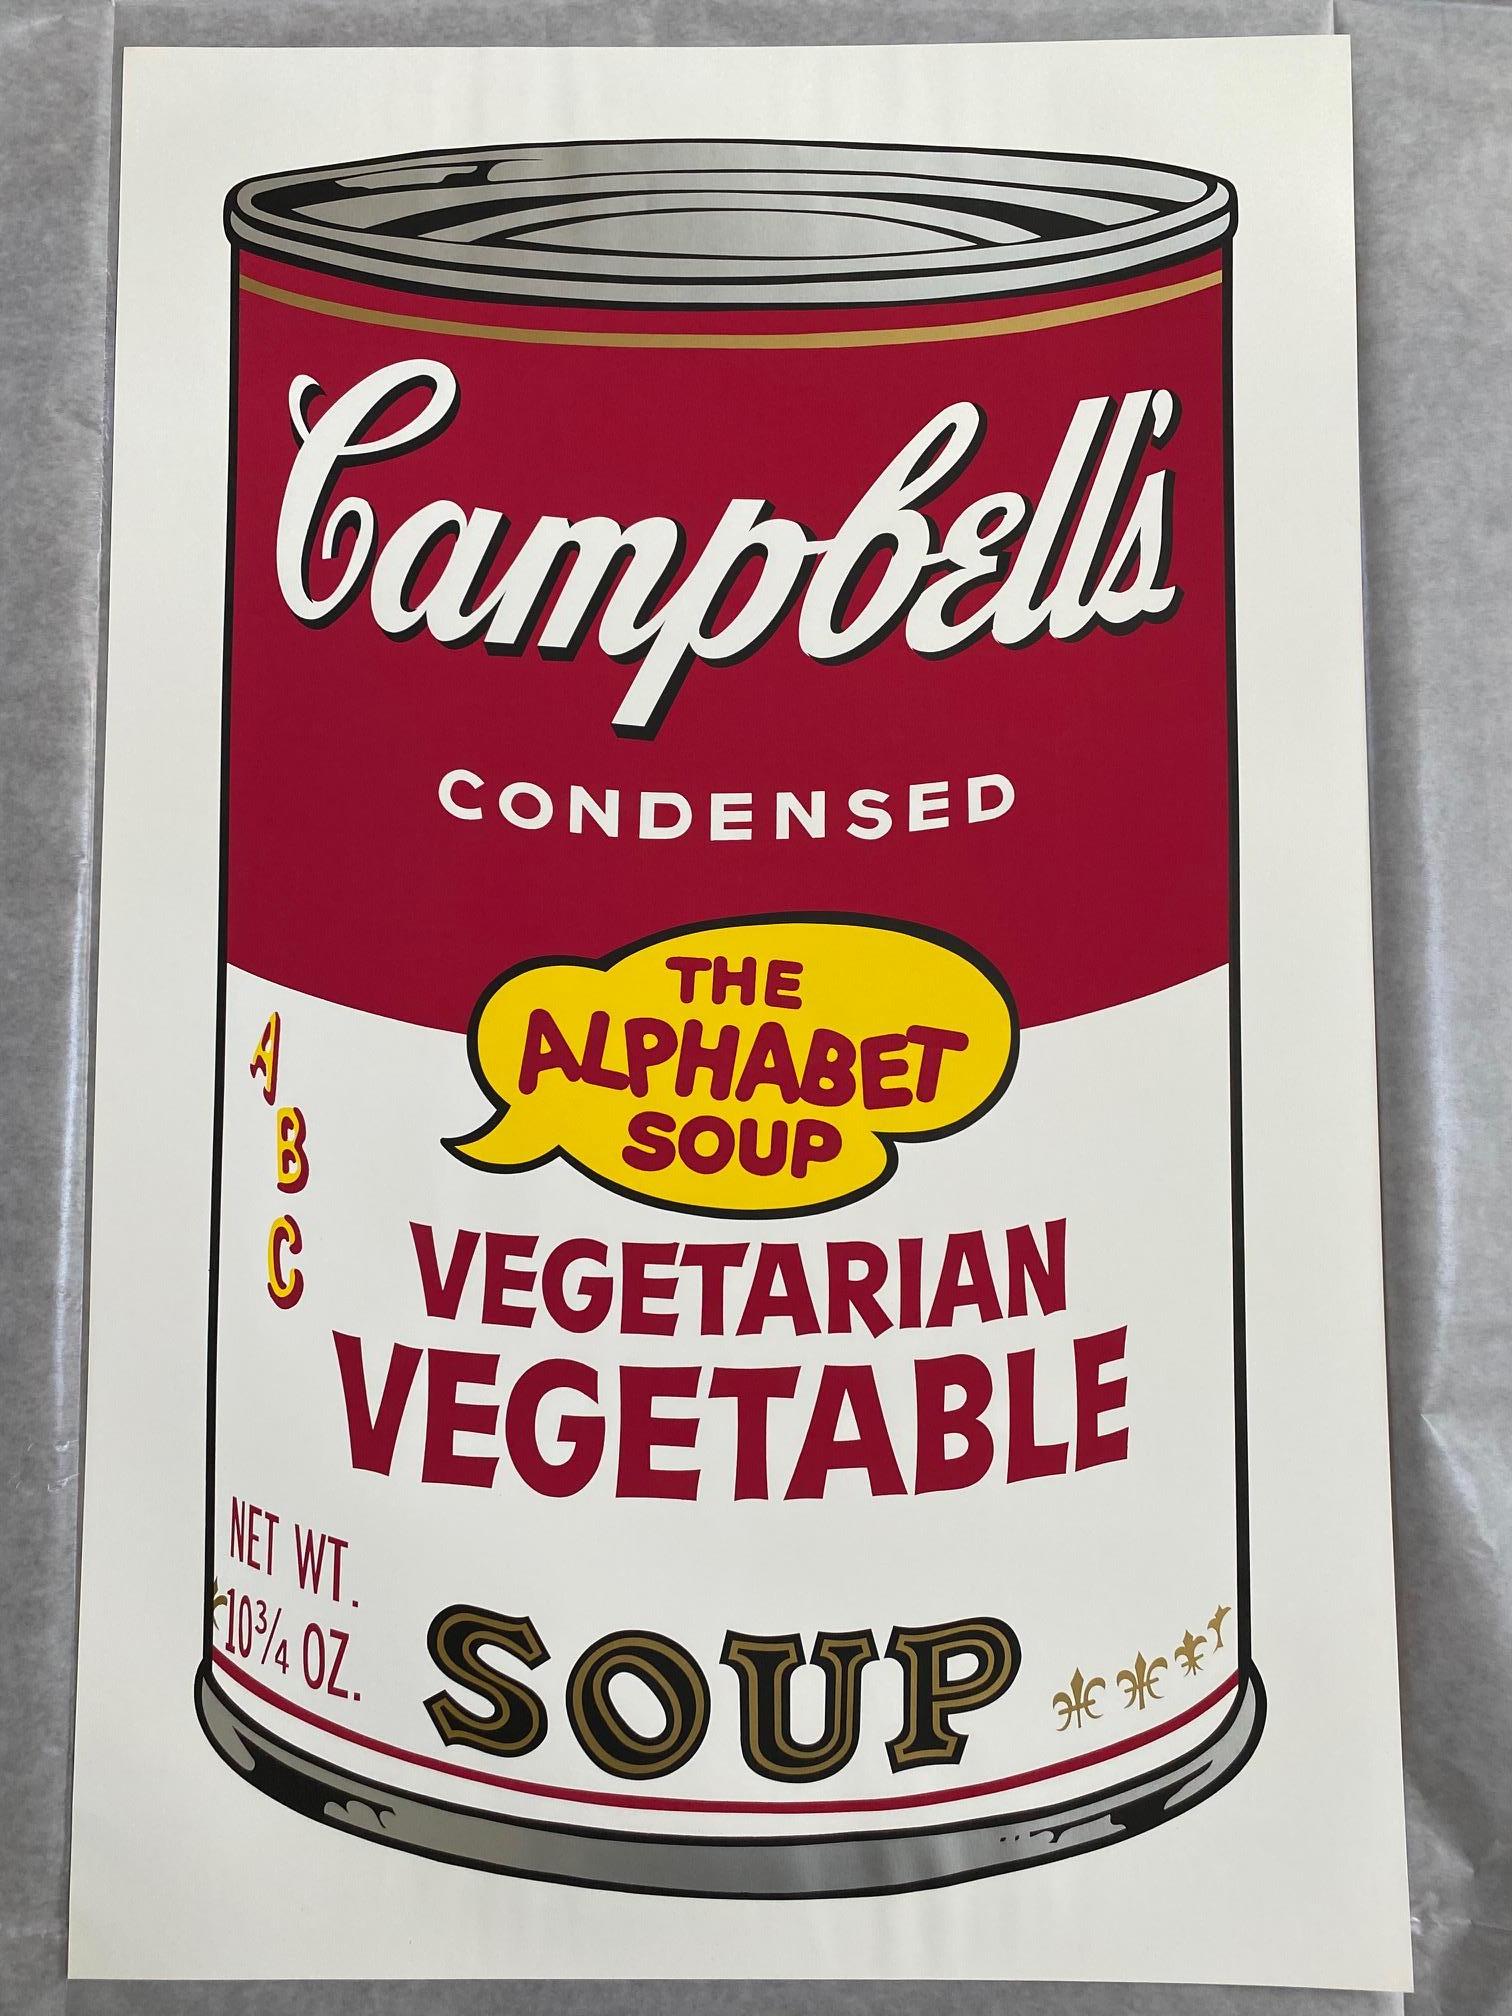 vegetarian vegetable from campbell's soup 2 1969 andy warhol